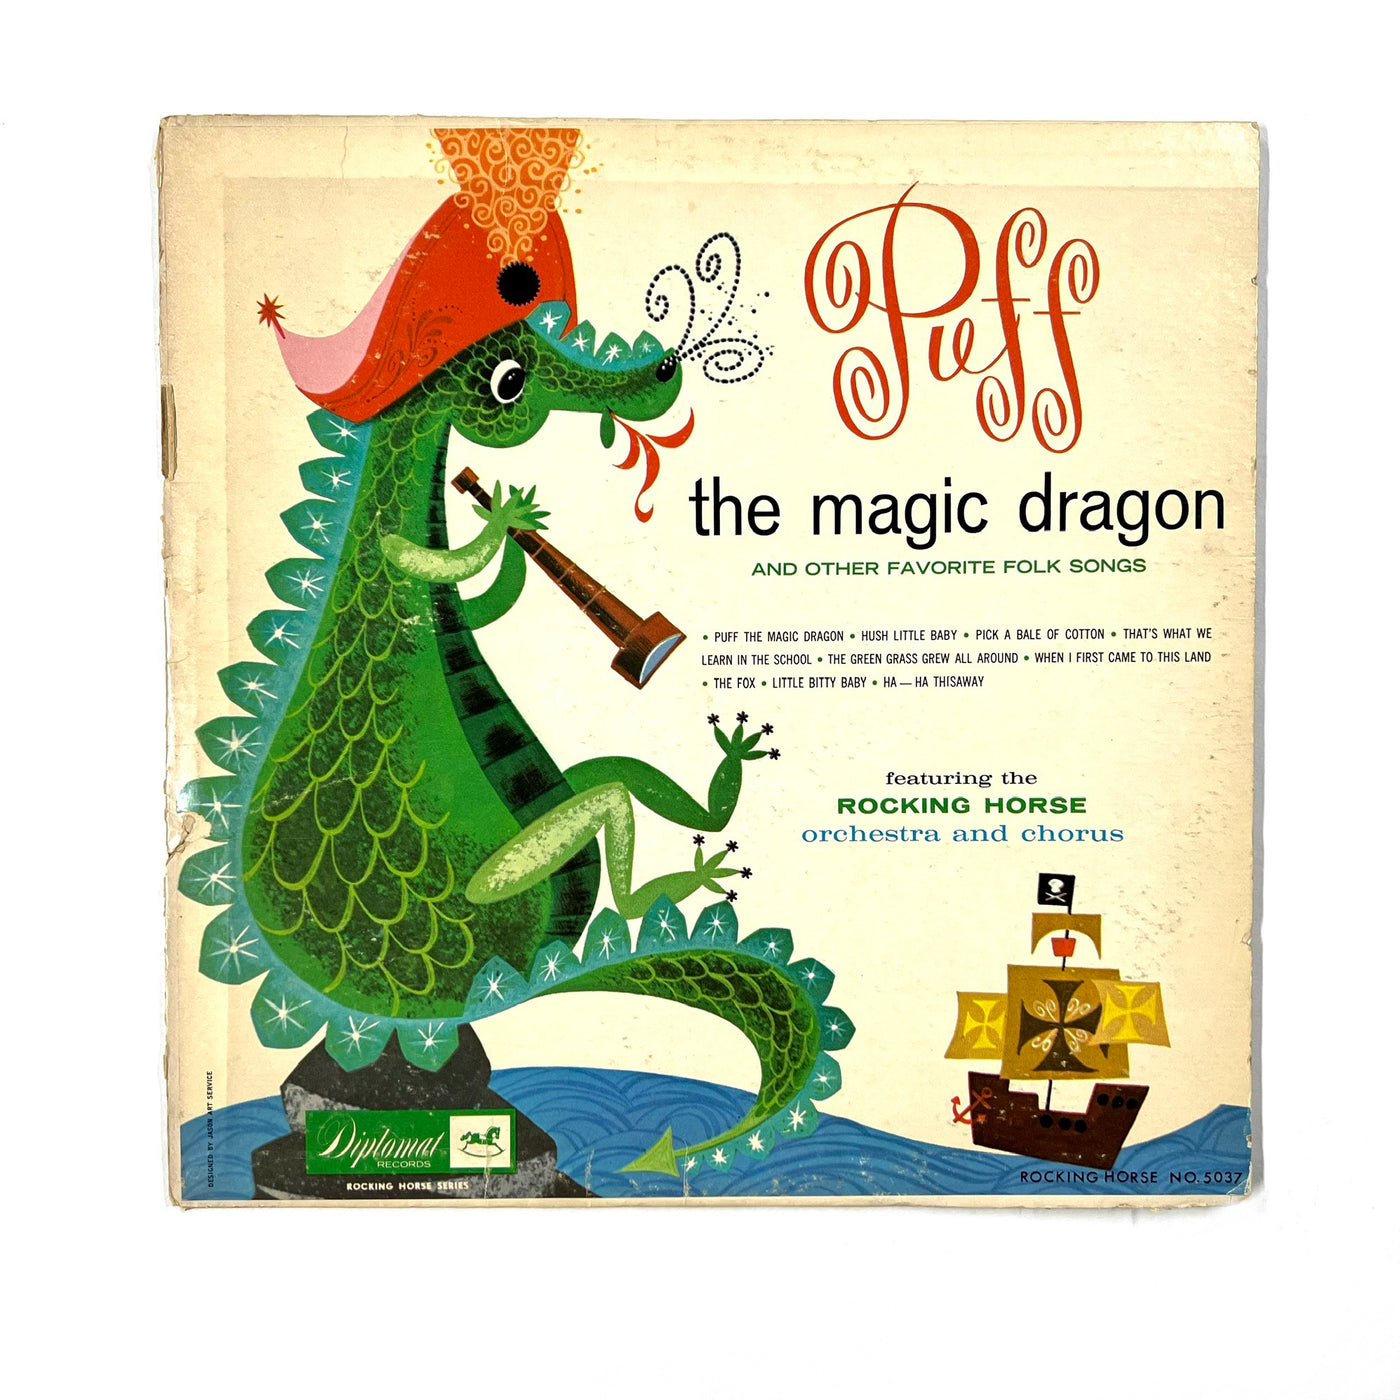 The Rocking Horse Players And Orchestra - Puff The Magic Dragon And Other Favorite Folk Songs